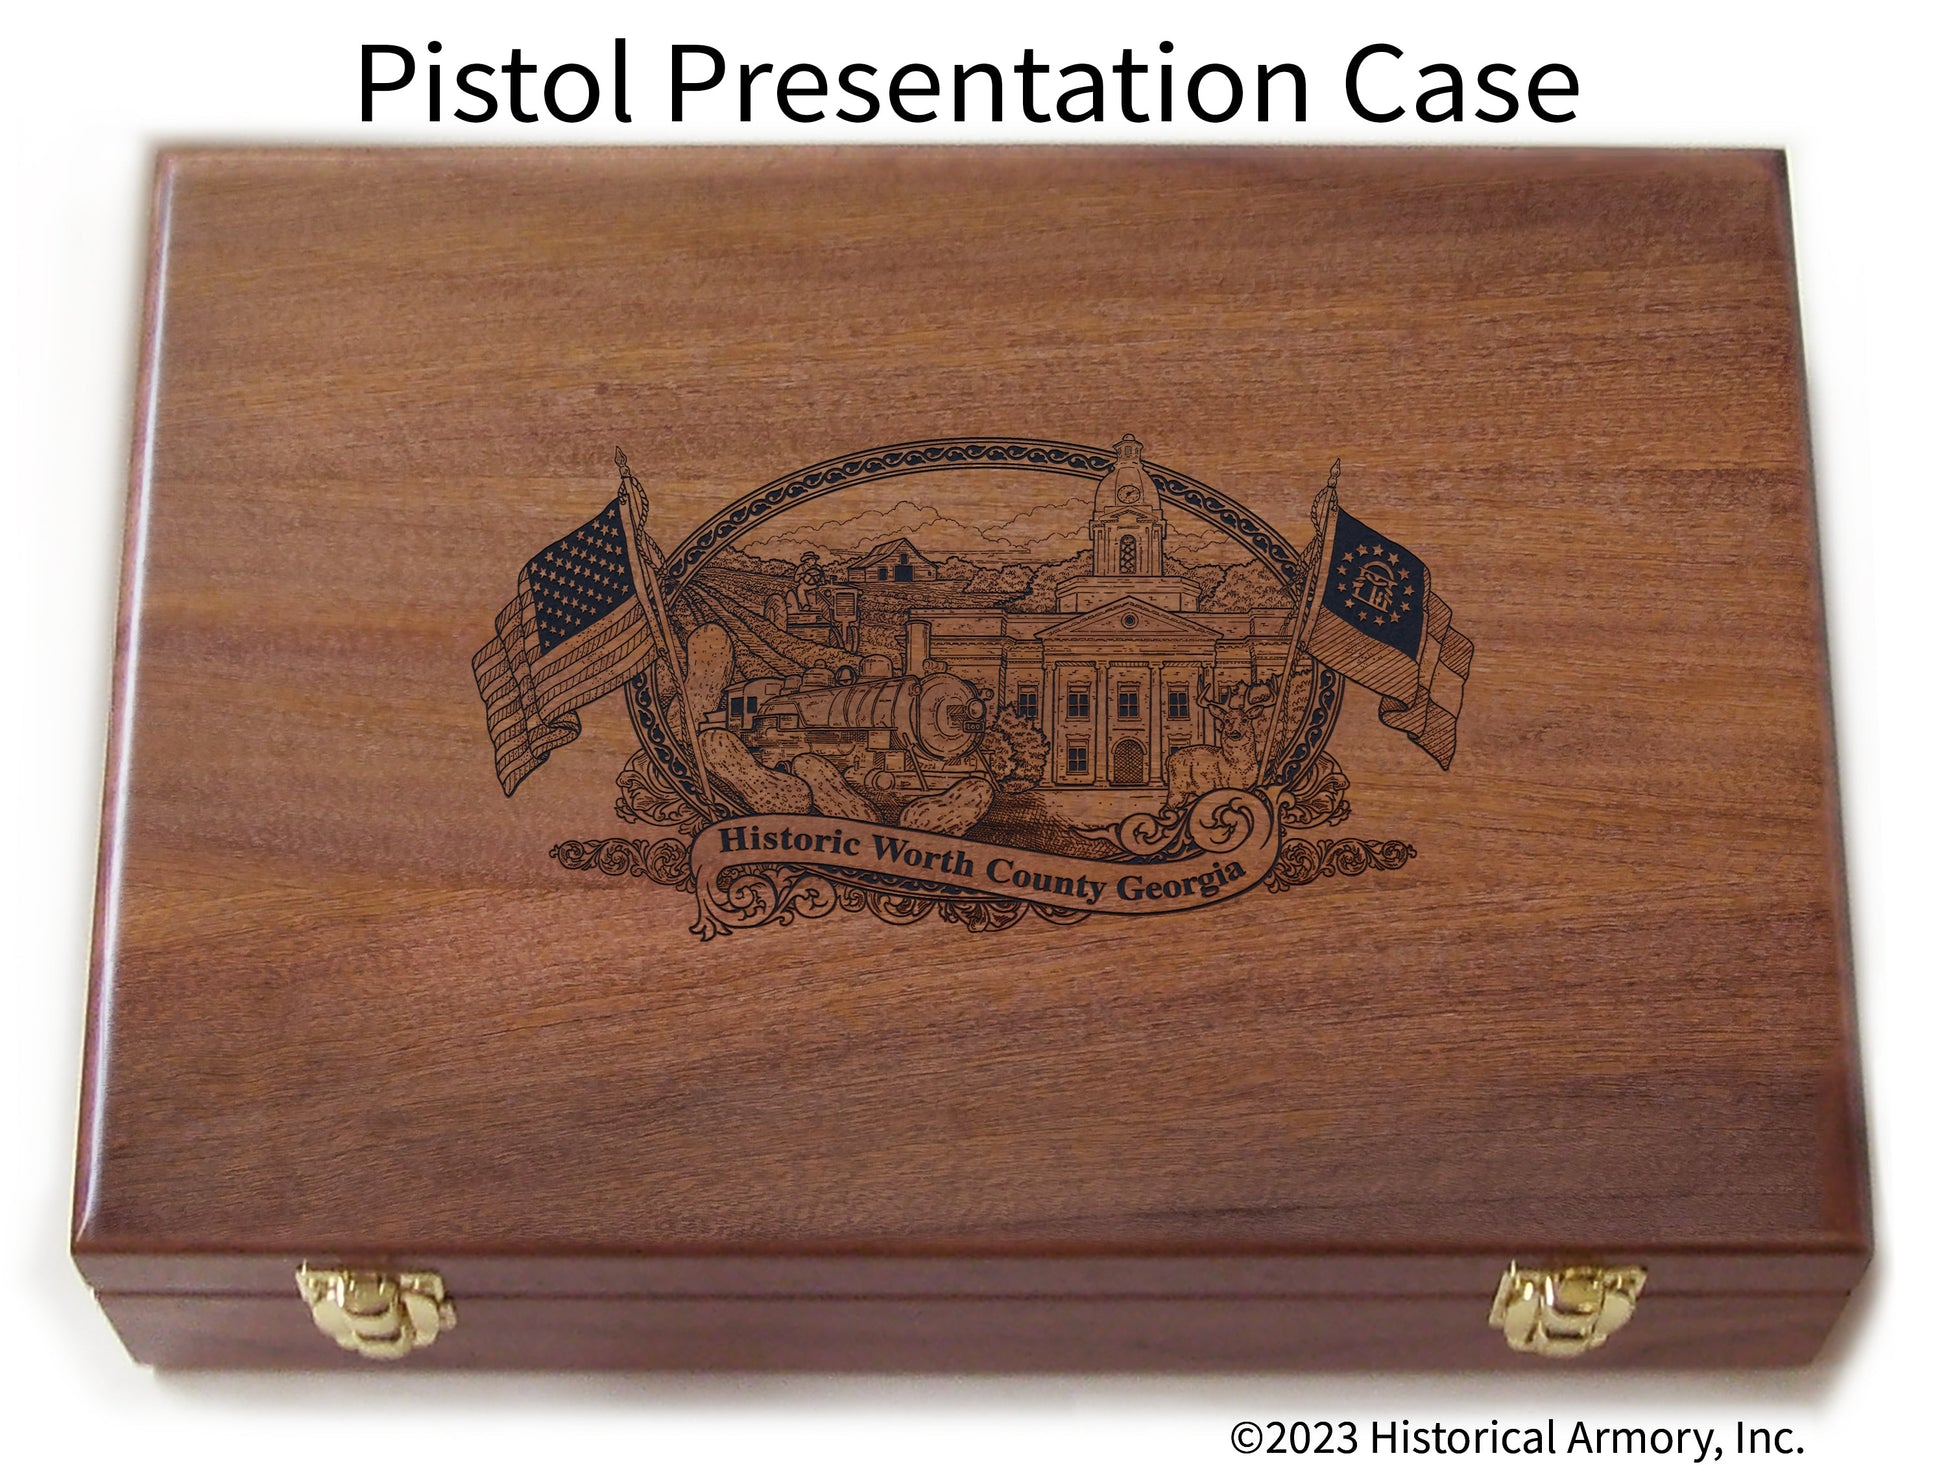 Worth County Georgia Engraved .45 Auto Ruger 1911 Presentation Case